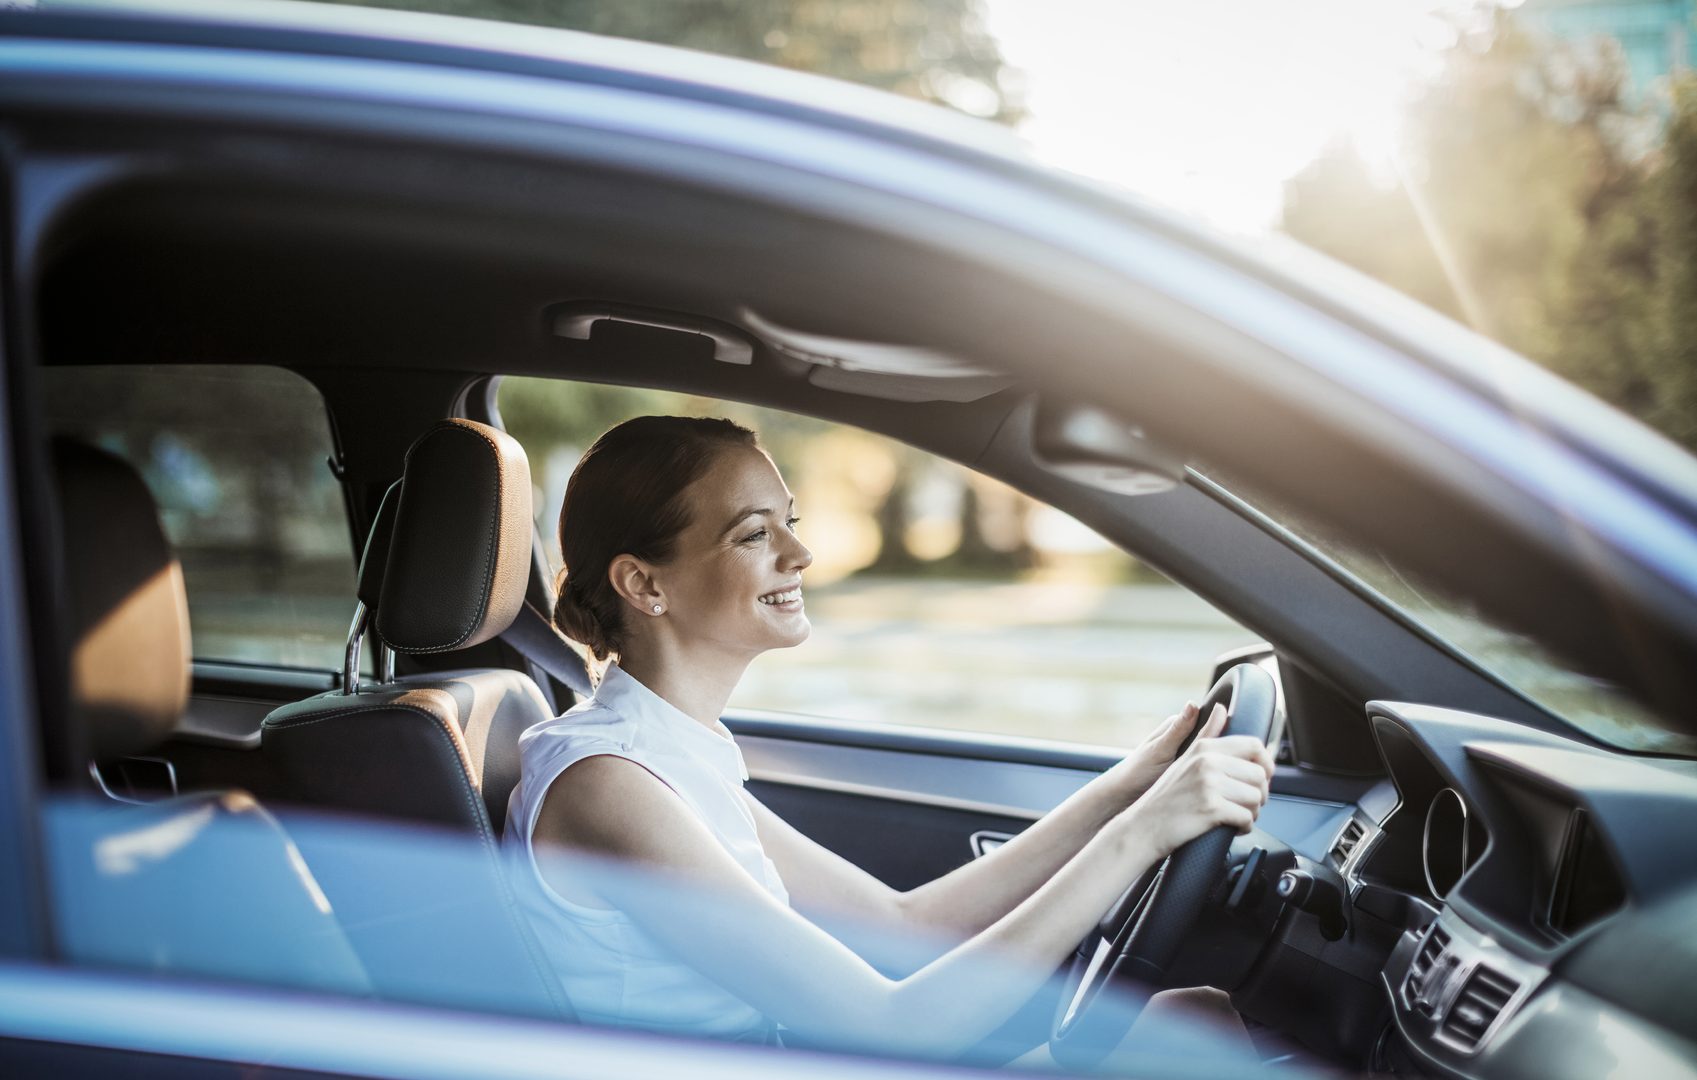 Credit Scores and Car Loans: What You Need to Know Before Buying a Car